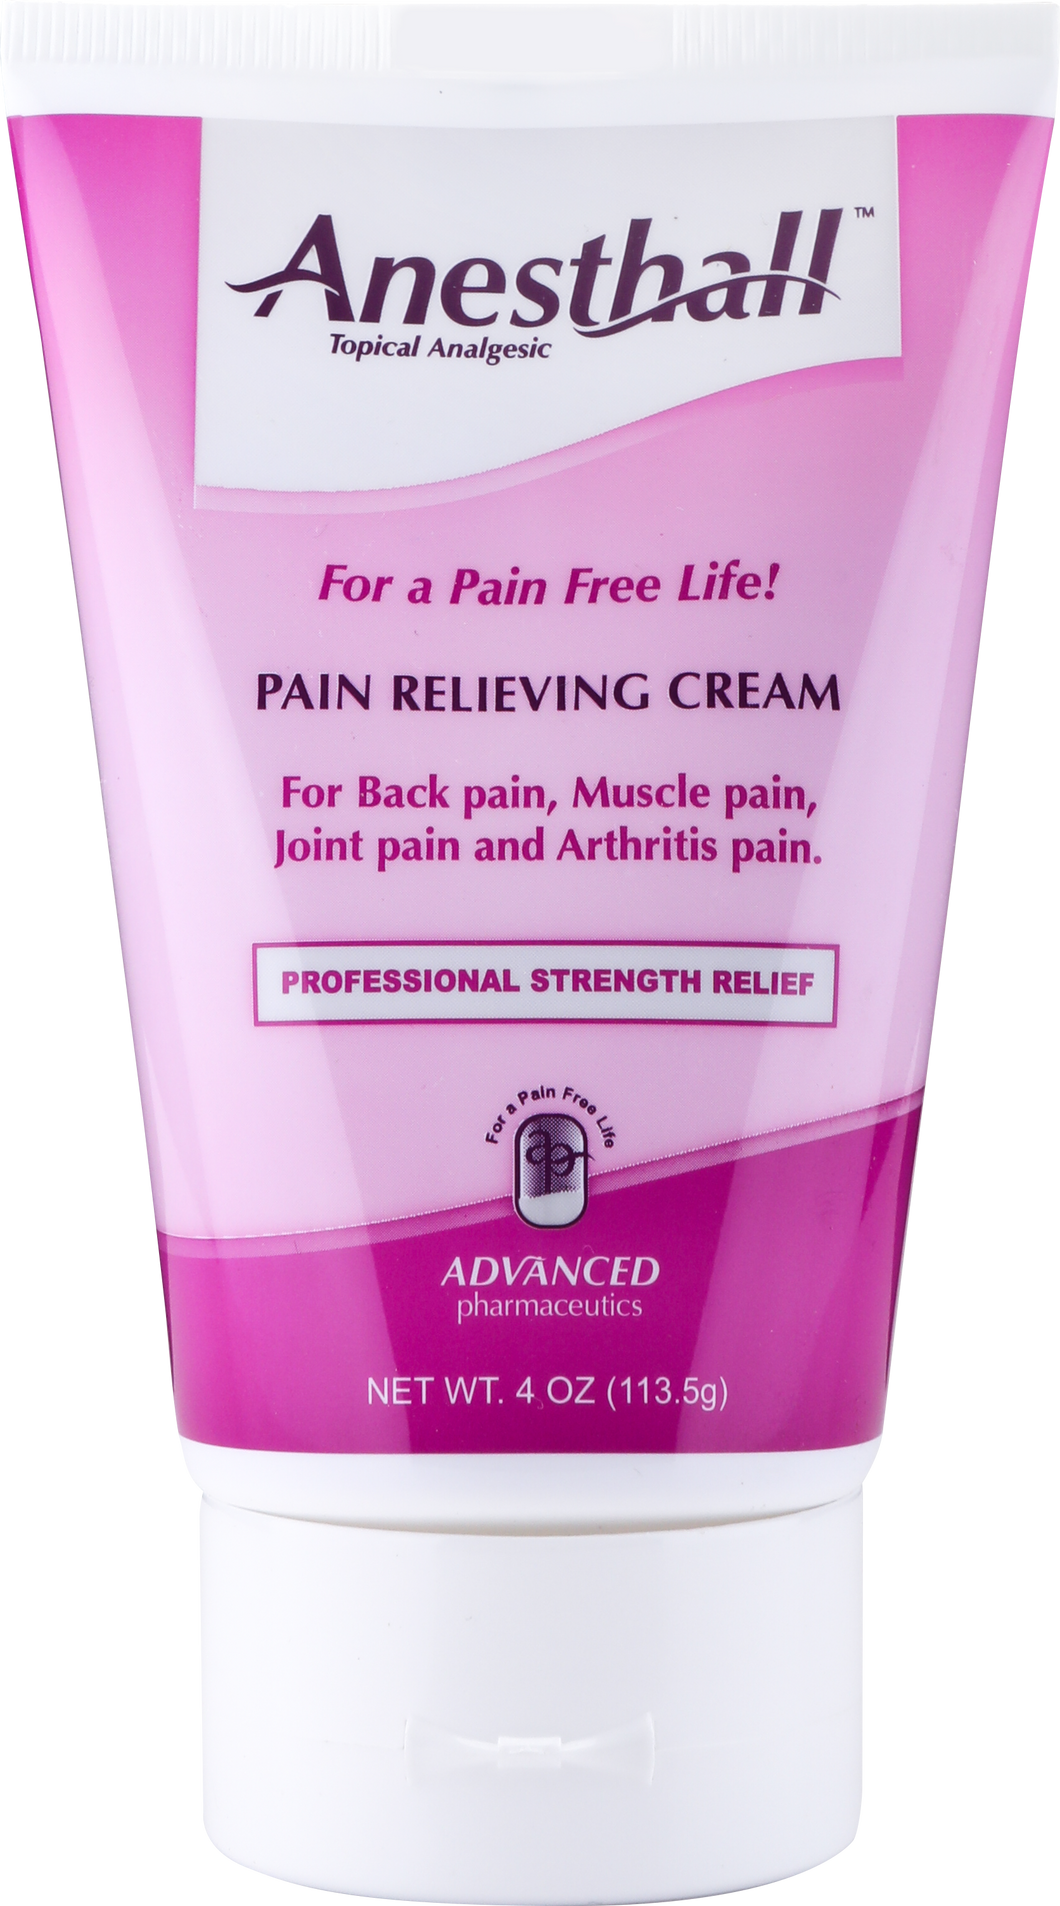 Anesthall Pain Relieving Cream Tube  96 4 OZ. Tubes